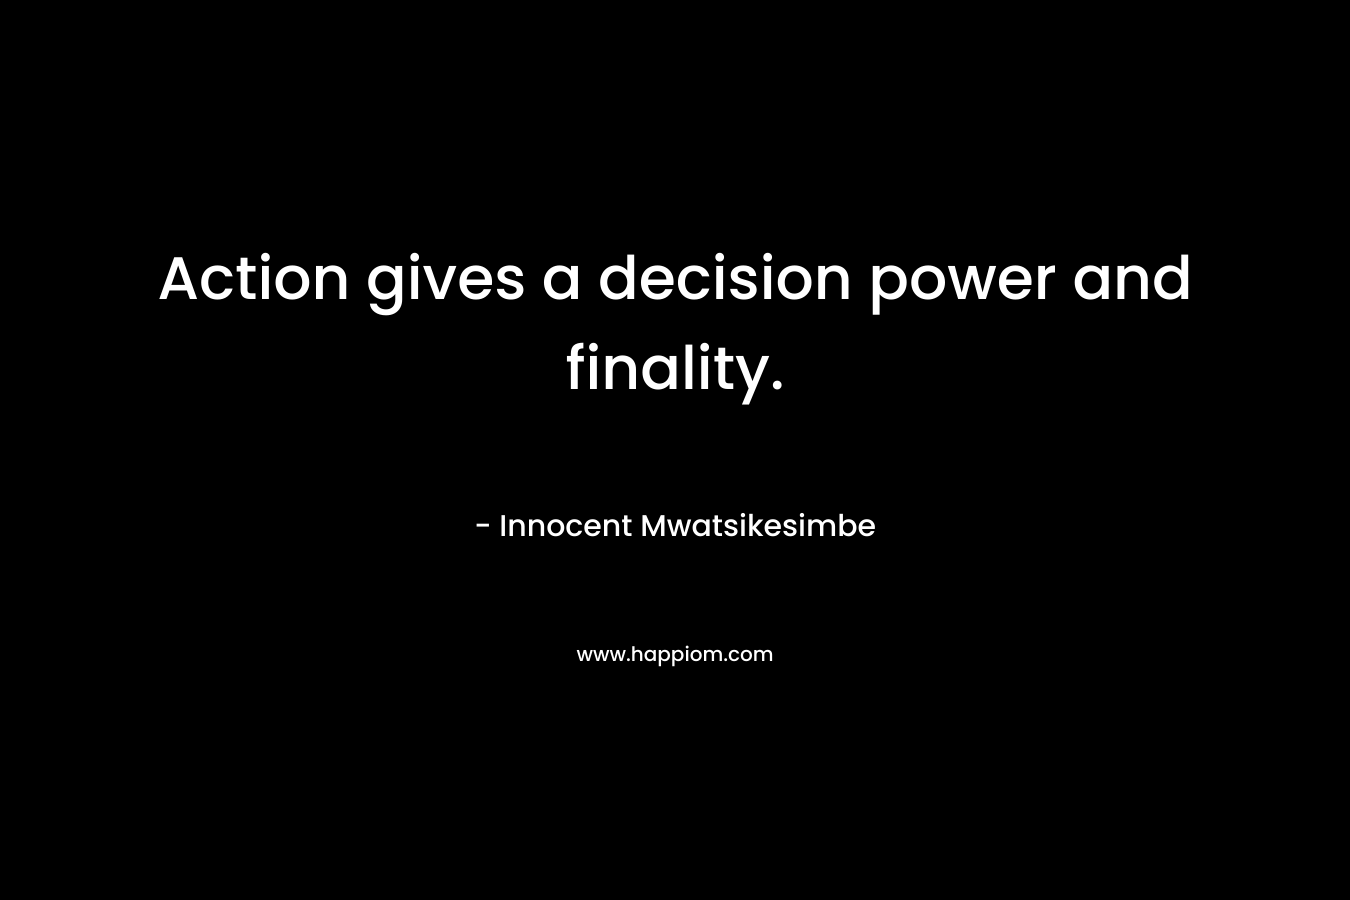 Action gives a decision power and finality.